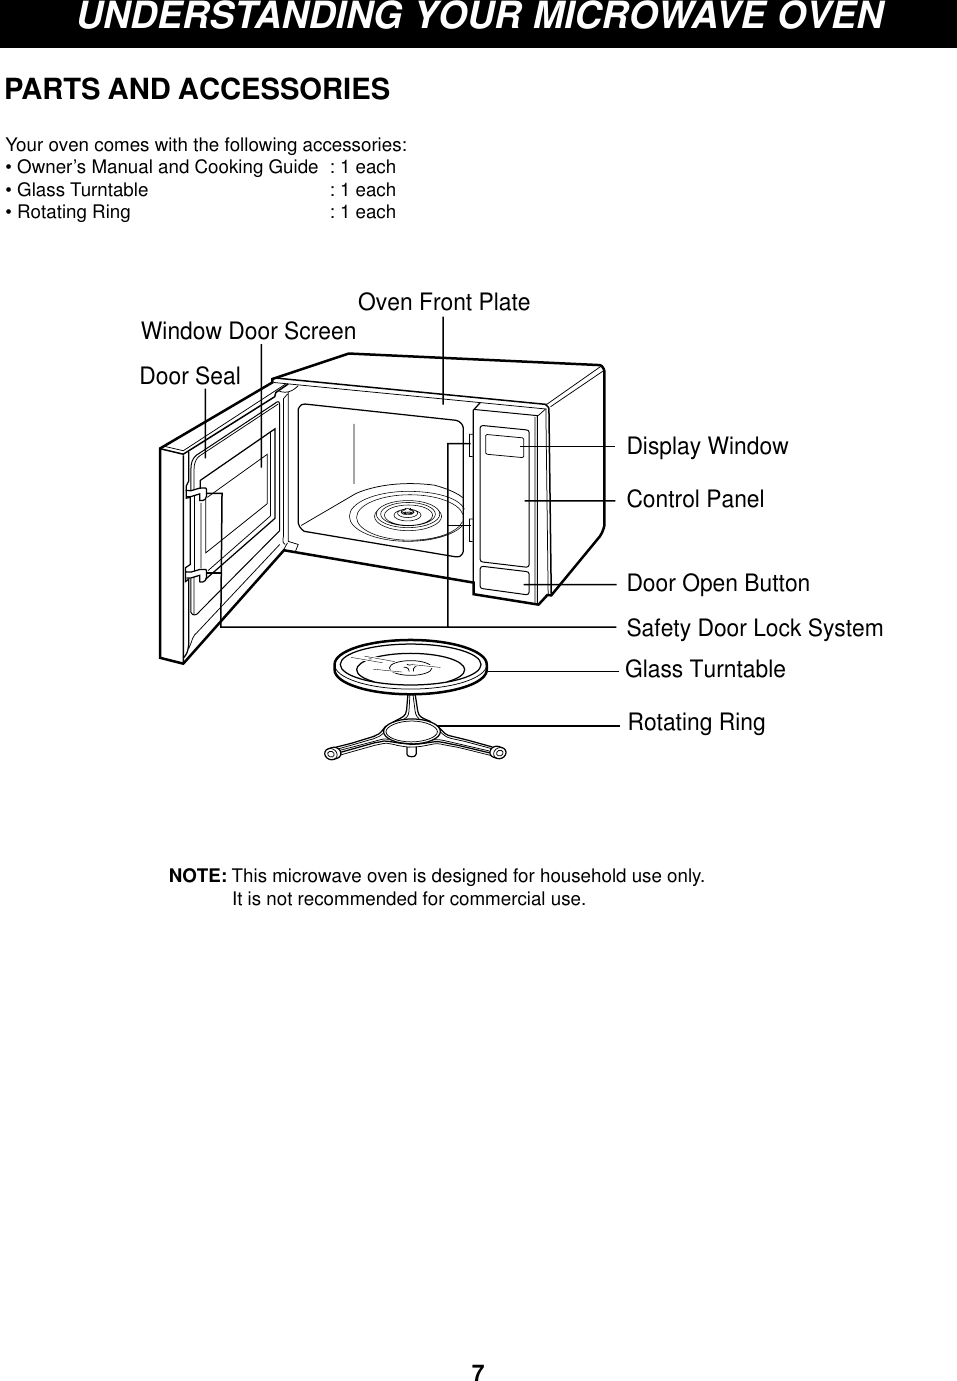 7UNDERSTANDING YOUR MICROWAVE OVENPARTS AND ACCESSORIESYour oven comes with the following accessories:• Owner’s Manual and Cooking Guide : 1 each• Glass Turntable : 1 each• Rotating Ring : 1 eachOven Front Plate Window Door ScreenDoor SealControl PanelDoor Open ButtonSafety Door Lock SystemGlass TurntableRotating RingDisplay WindowNOTE: This microwave oven is designed for household use only. It is not recommended for commercial use.